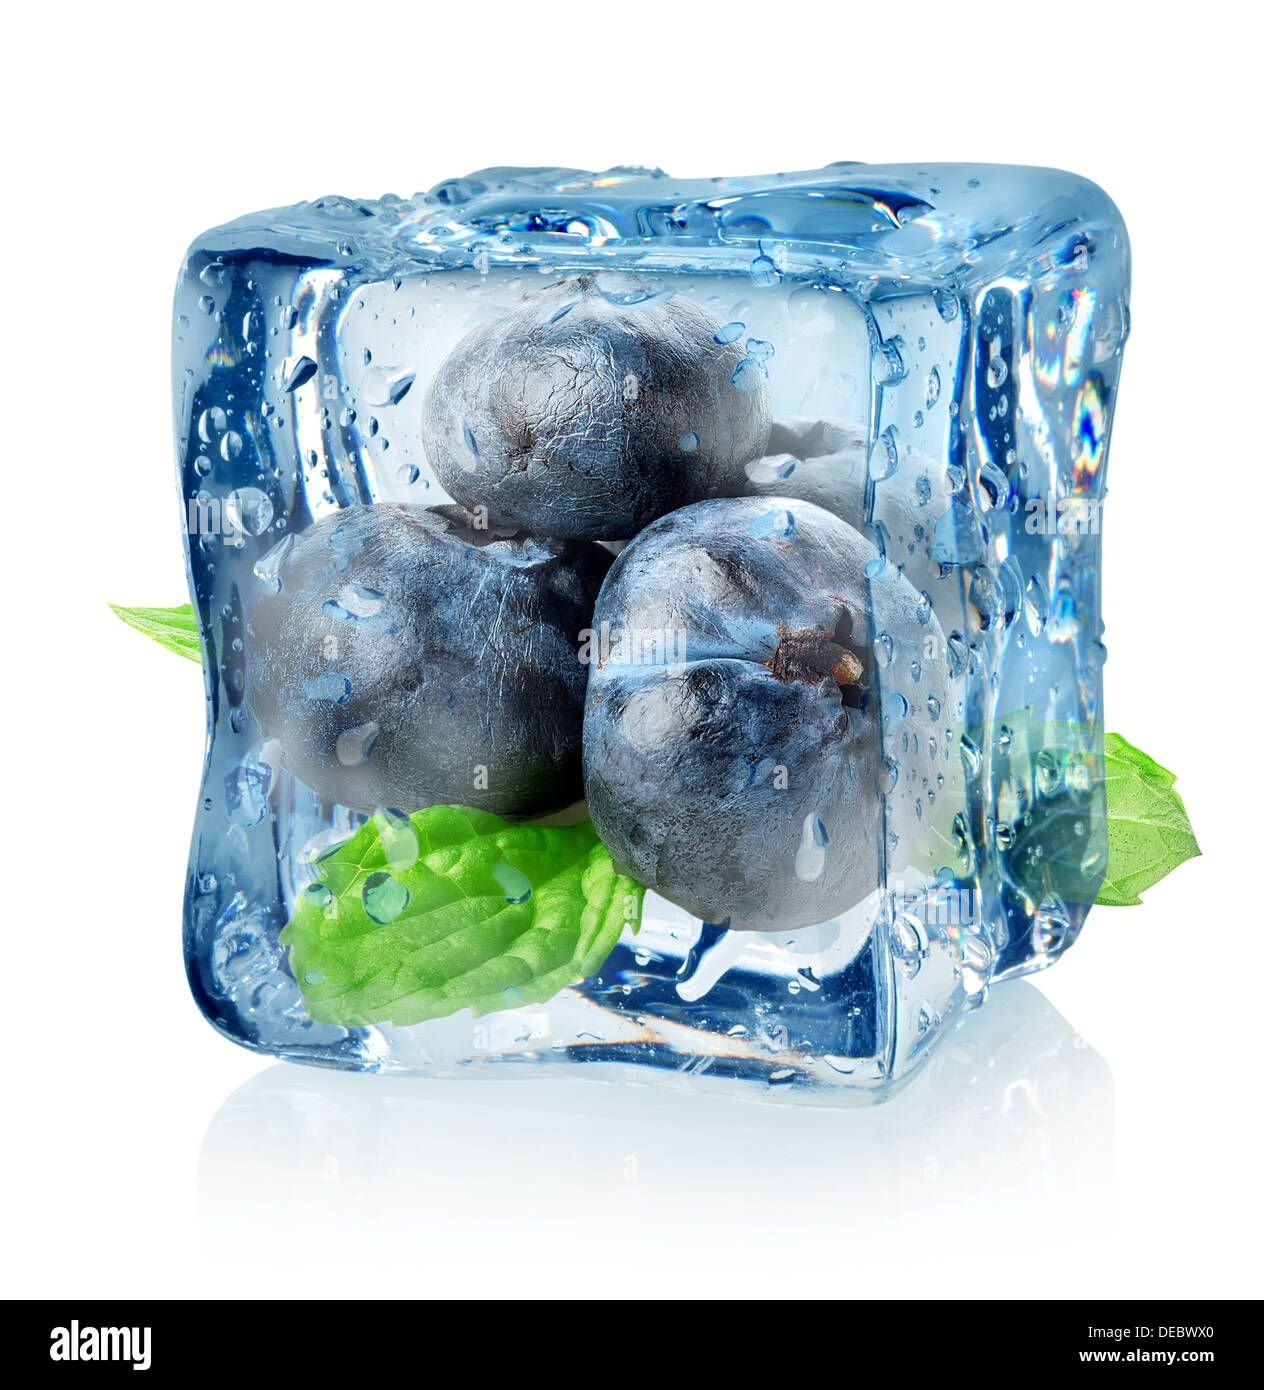 Ice cube and blueberry isolated on a white background Stock Photo